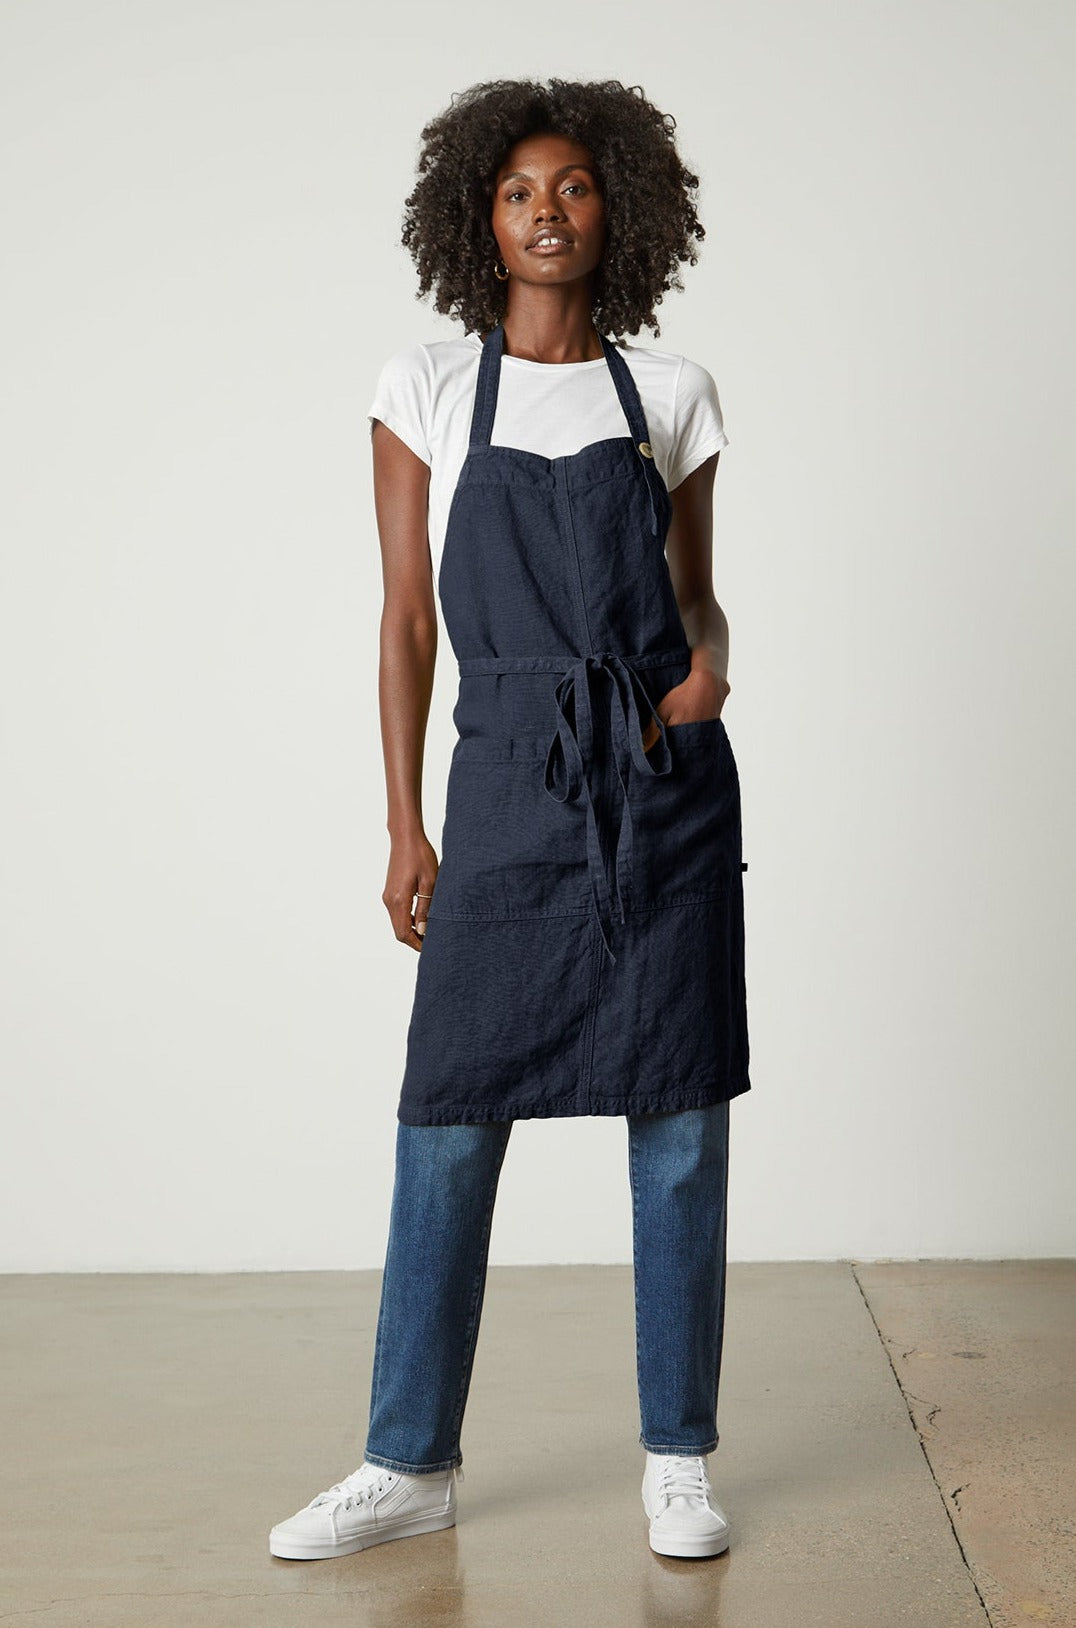   A woman wearing a navy LINEN APRON from Jenny Graham Home and jeans with an adjustable neck strap. 